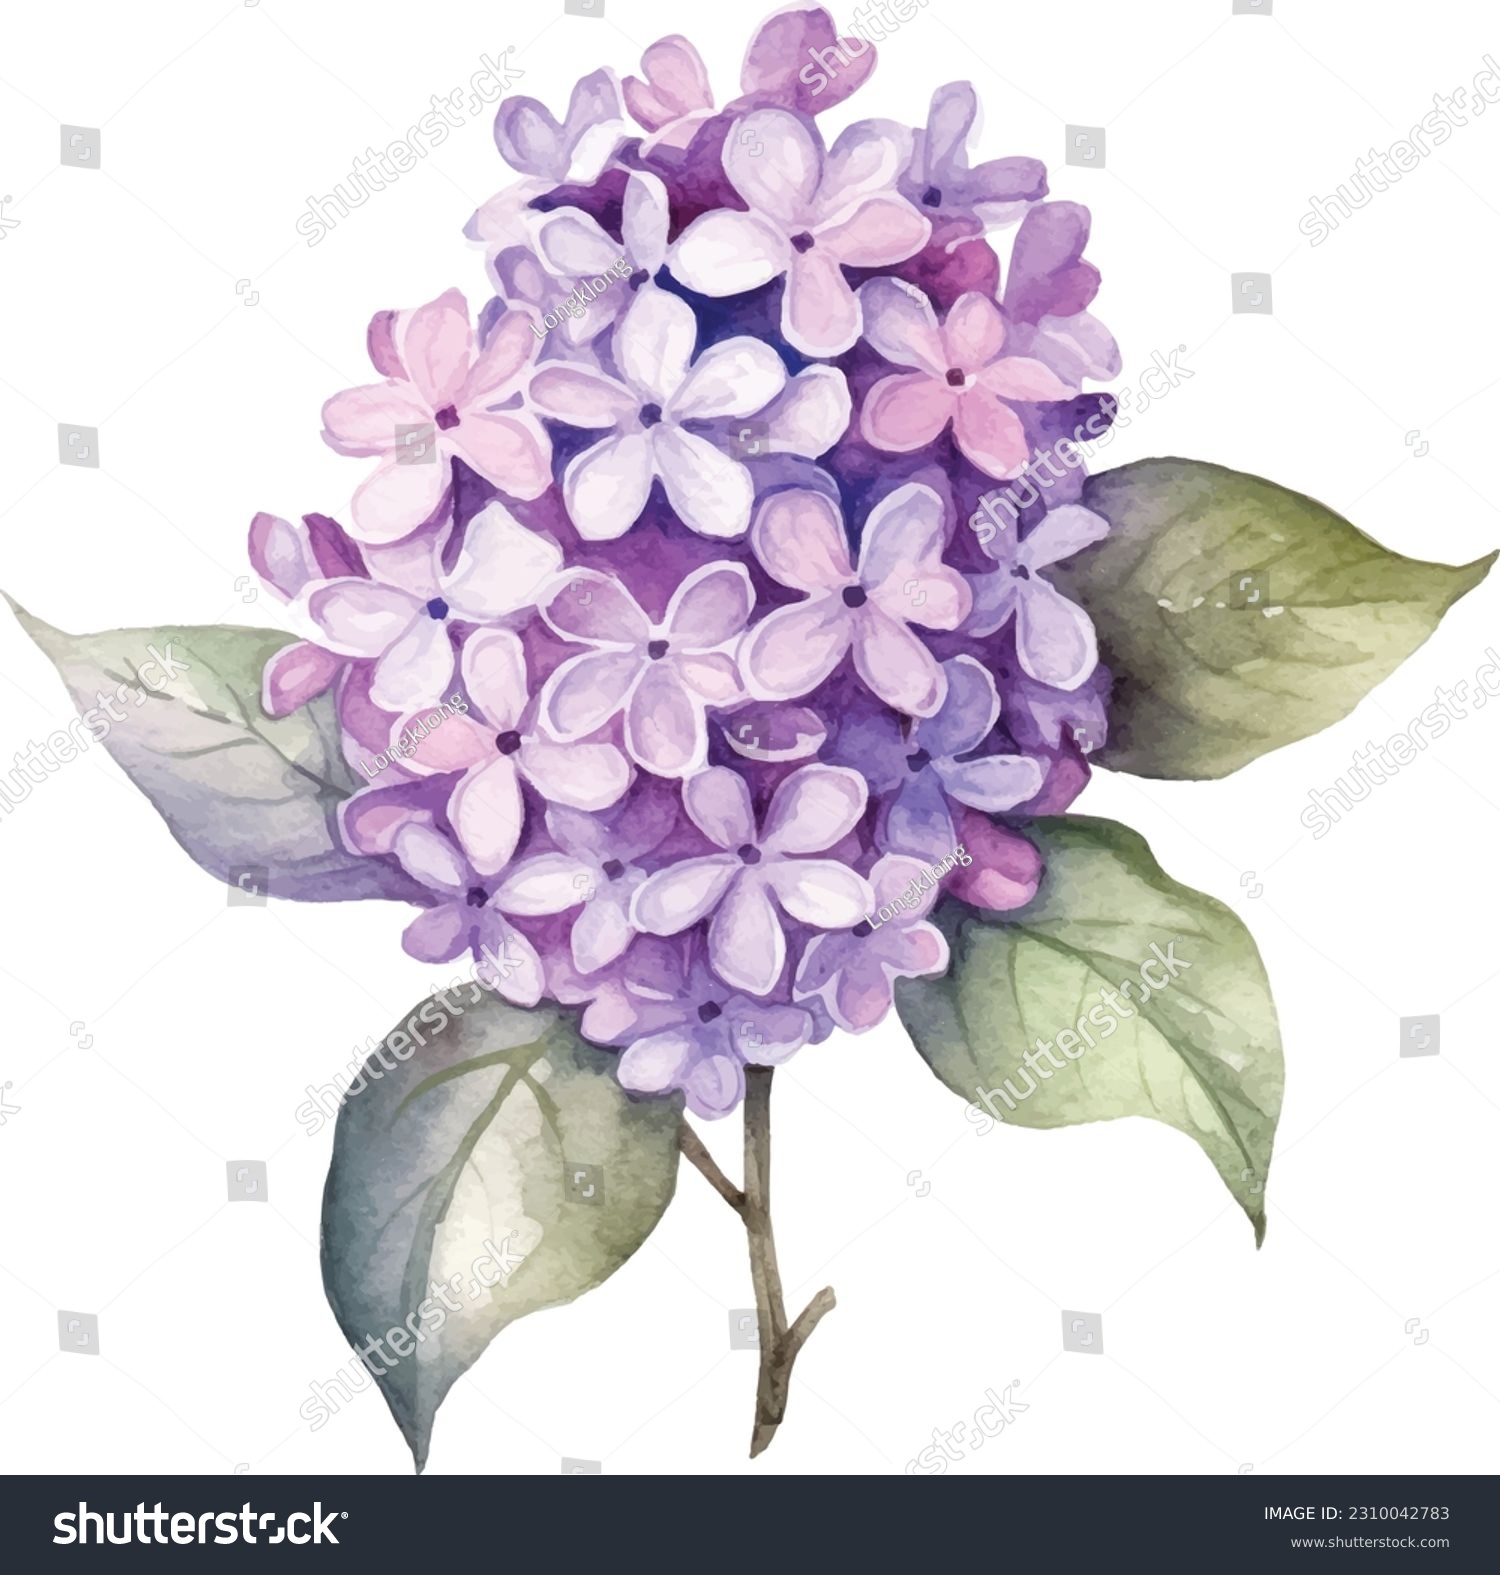 SVG of Vintage drawn illustration of Lilac free download shutterstock perfect for fabrics, t-shirts, mugs, decals, pillows, logo, pattern and much more svg